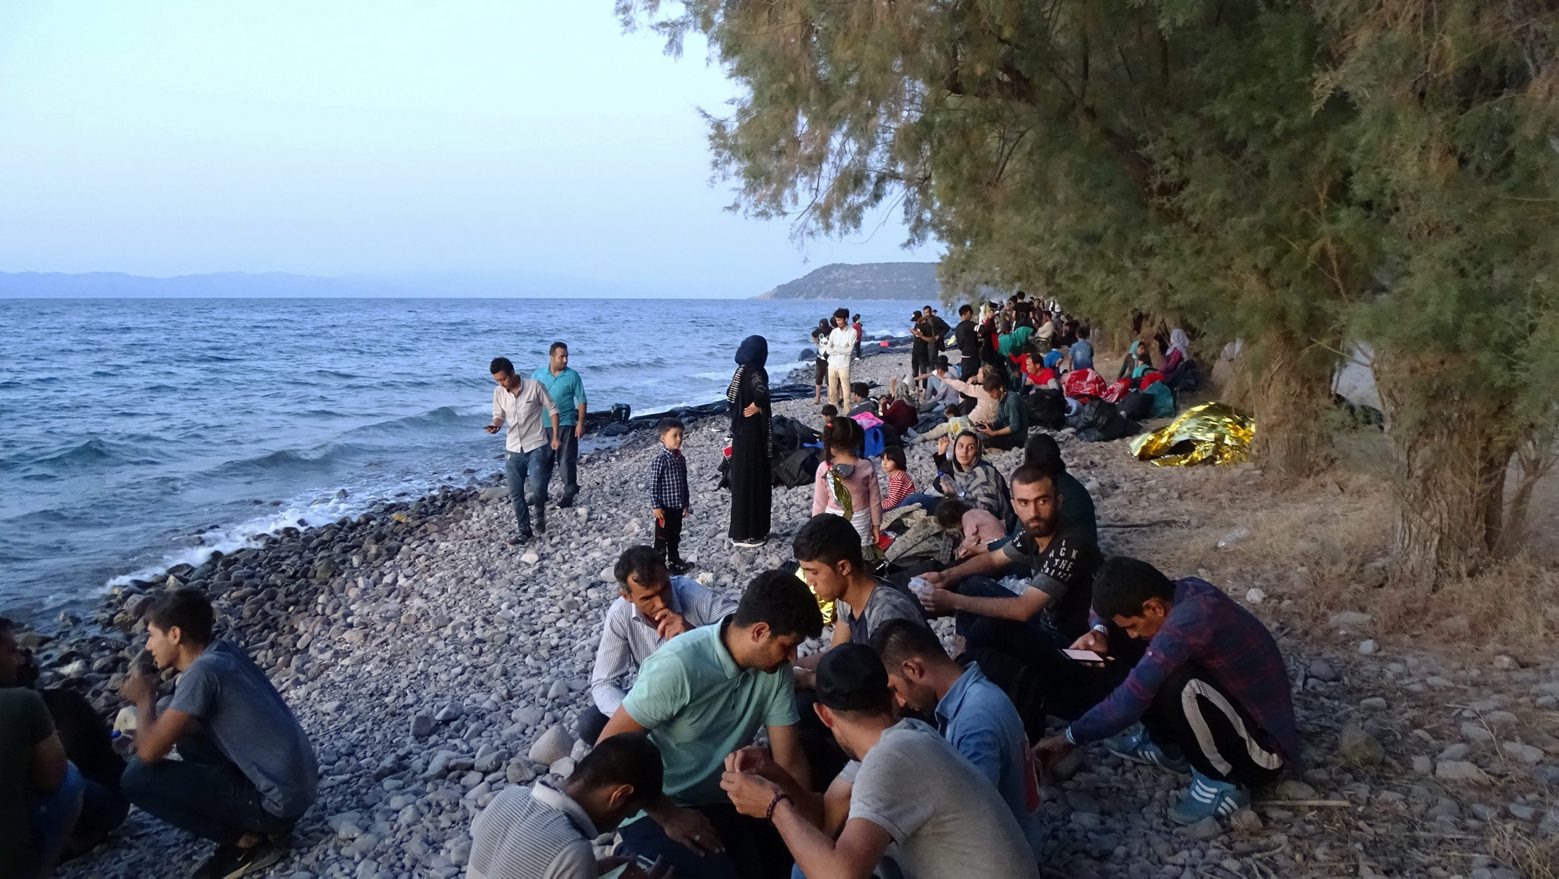 epa07803513 Migrants, who arrived on 13 boats, at Skala Sikamias, Lesvos Island, Greece, 29 August 2019 (issued 30 August 2019). A total of 547 people landed on the island, including 177 men, 124 women and 246 children. Of these, 193 were transferred to the Moria Reception and Identification Center and the rest remained at the UNHCR camp in Sykamia, the so-called 'stage 2' camp, with the prospect of being transferred to Moria for registration on 30 August. According to reports, two Coast Guard vessels are operating in the area.  EPA/STRATIS BALASKAS GREECE MIGRATION